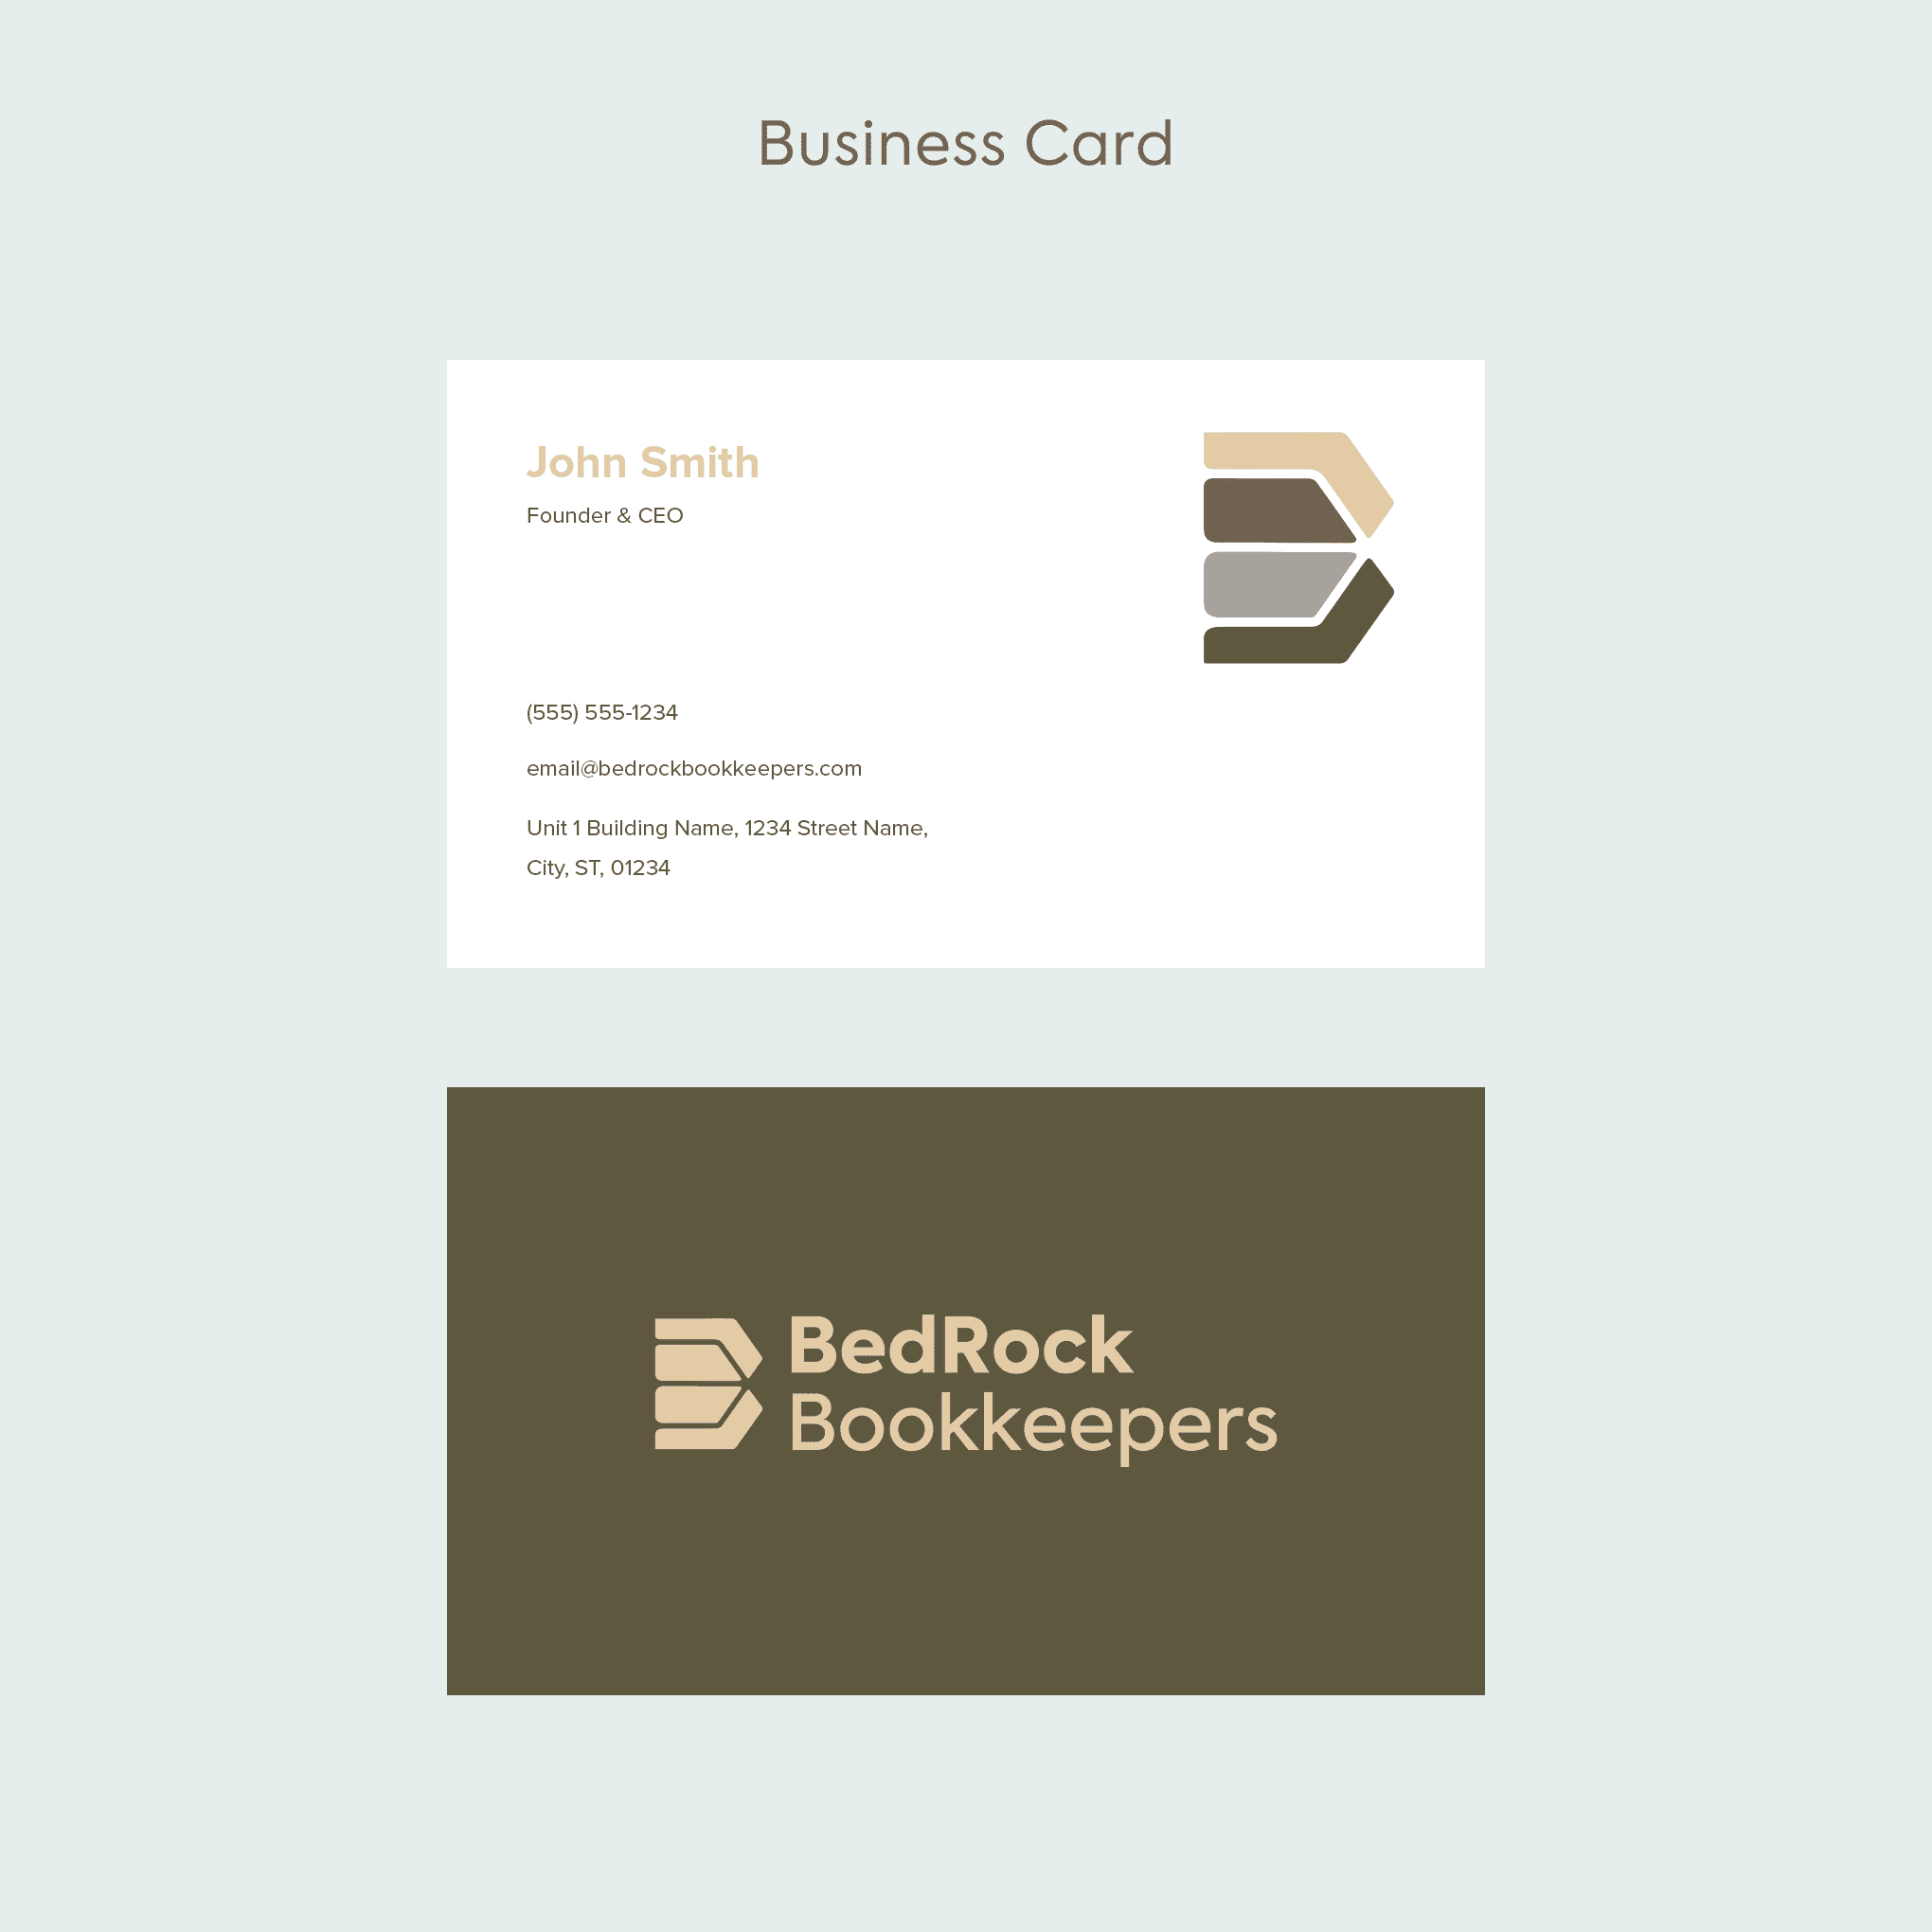 04 - Business Card Template (1)